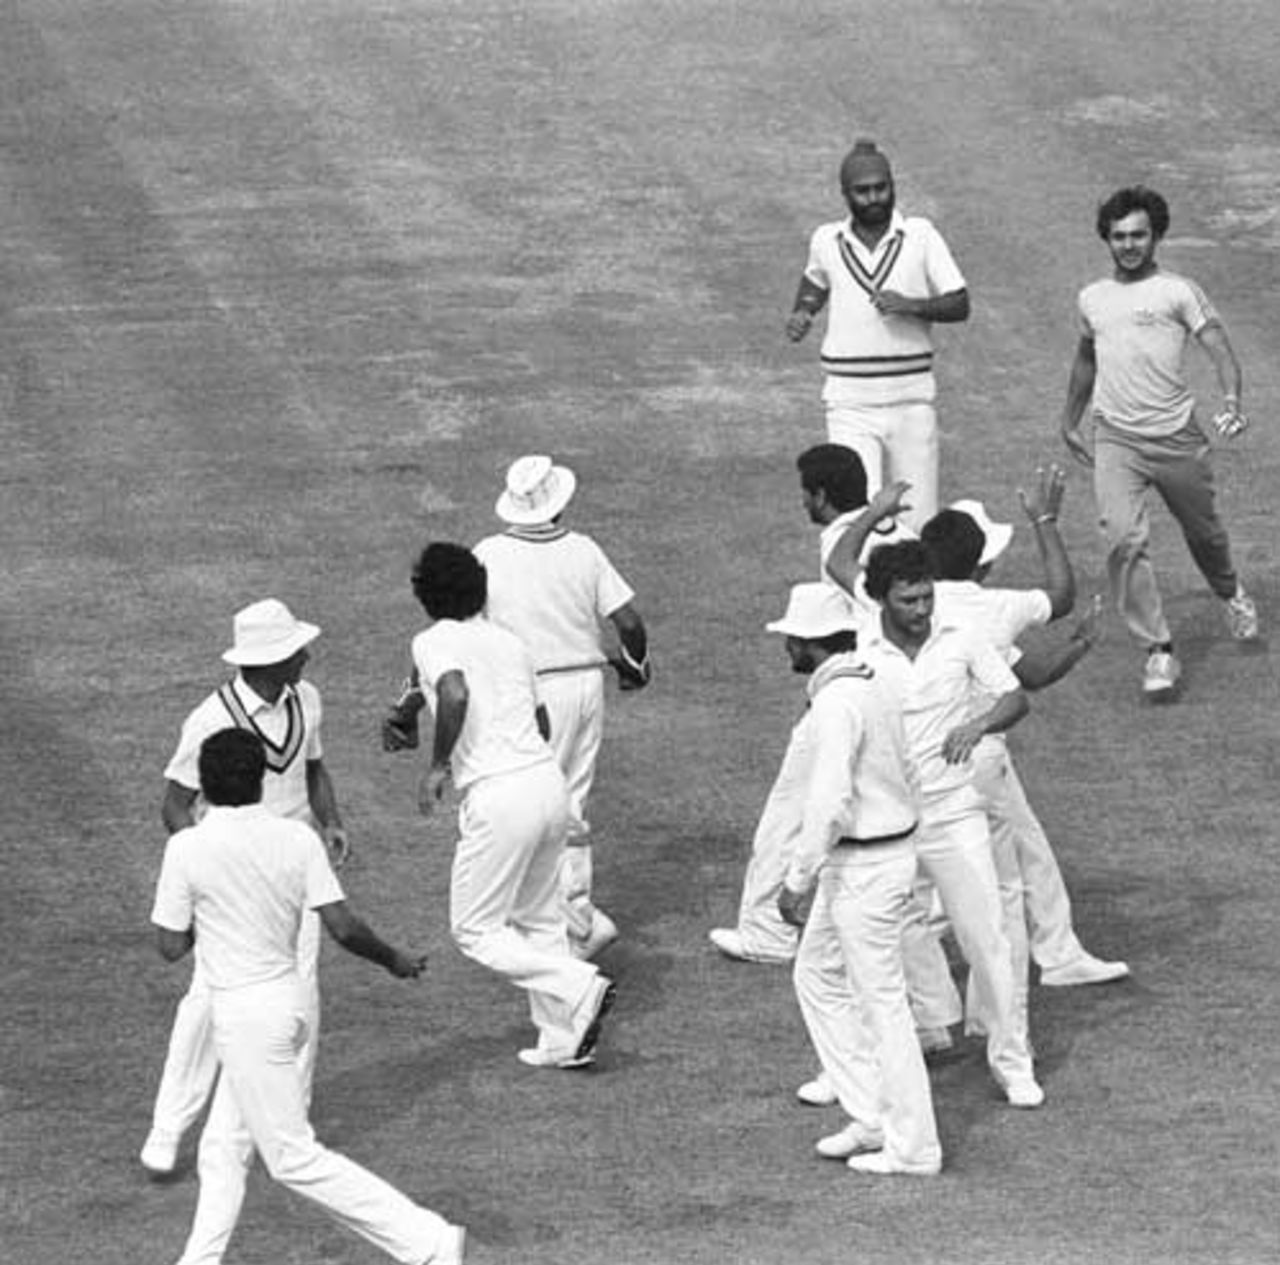 India's fans invade the pitch during the final at Lord's after Kapil Dev caught Viv Richards, World Cup final, 1983